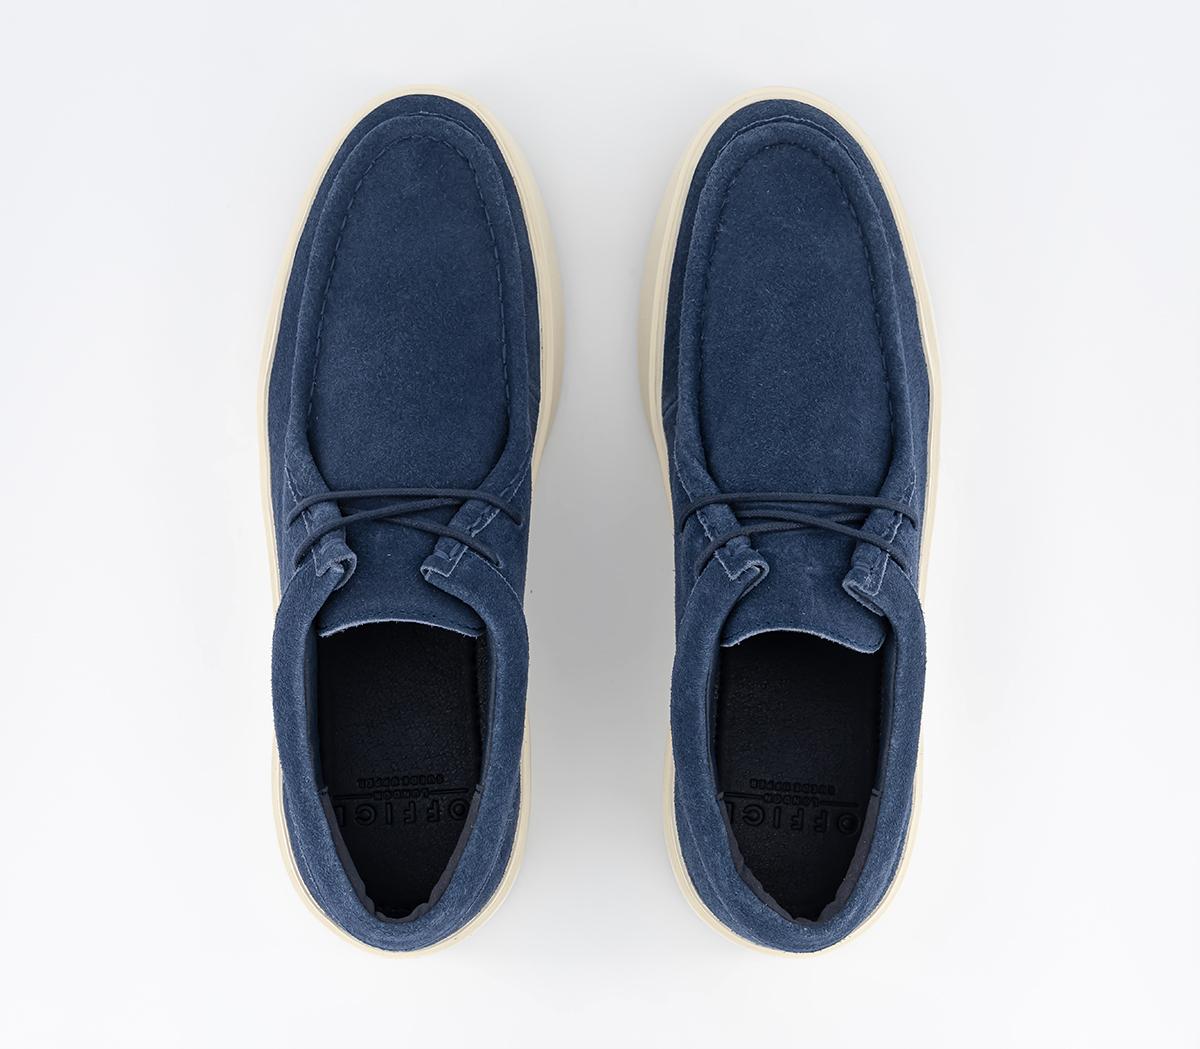 OFFICE Cooper Suede Apron Stitch Derby Shoes Navy Suede - Men's Casual ...